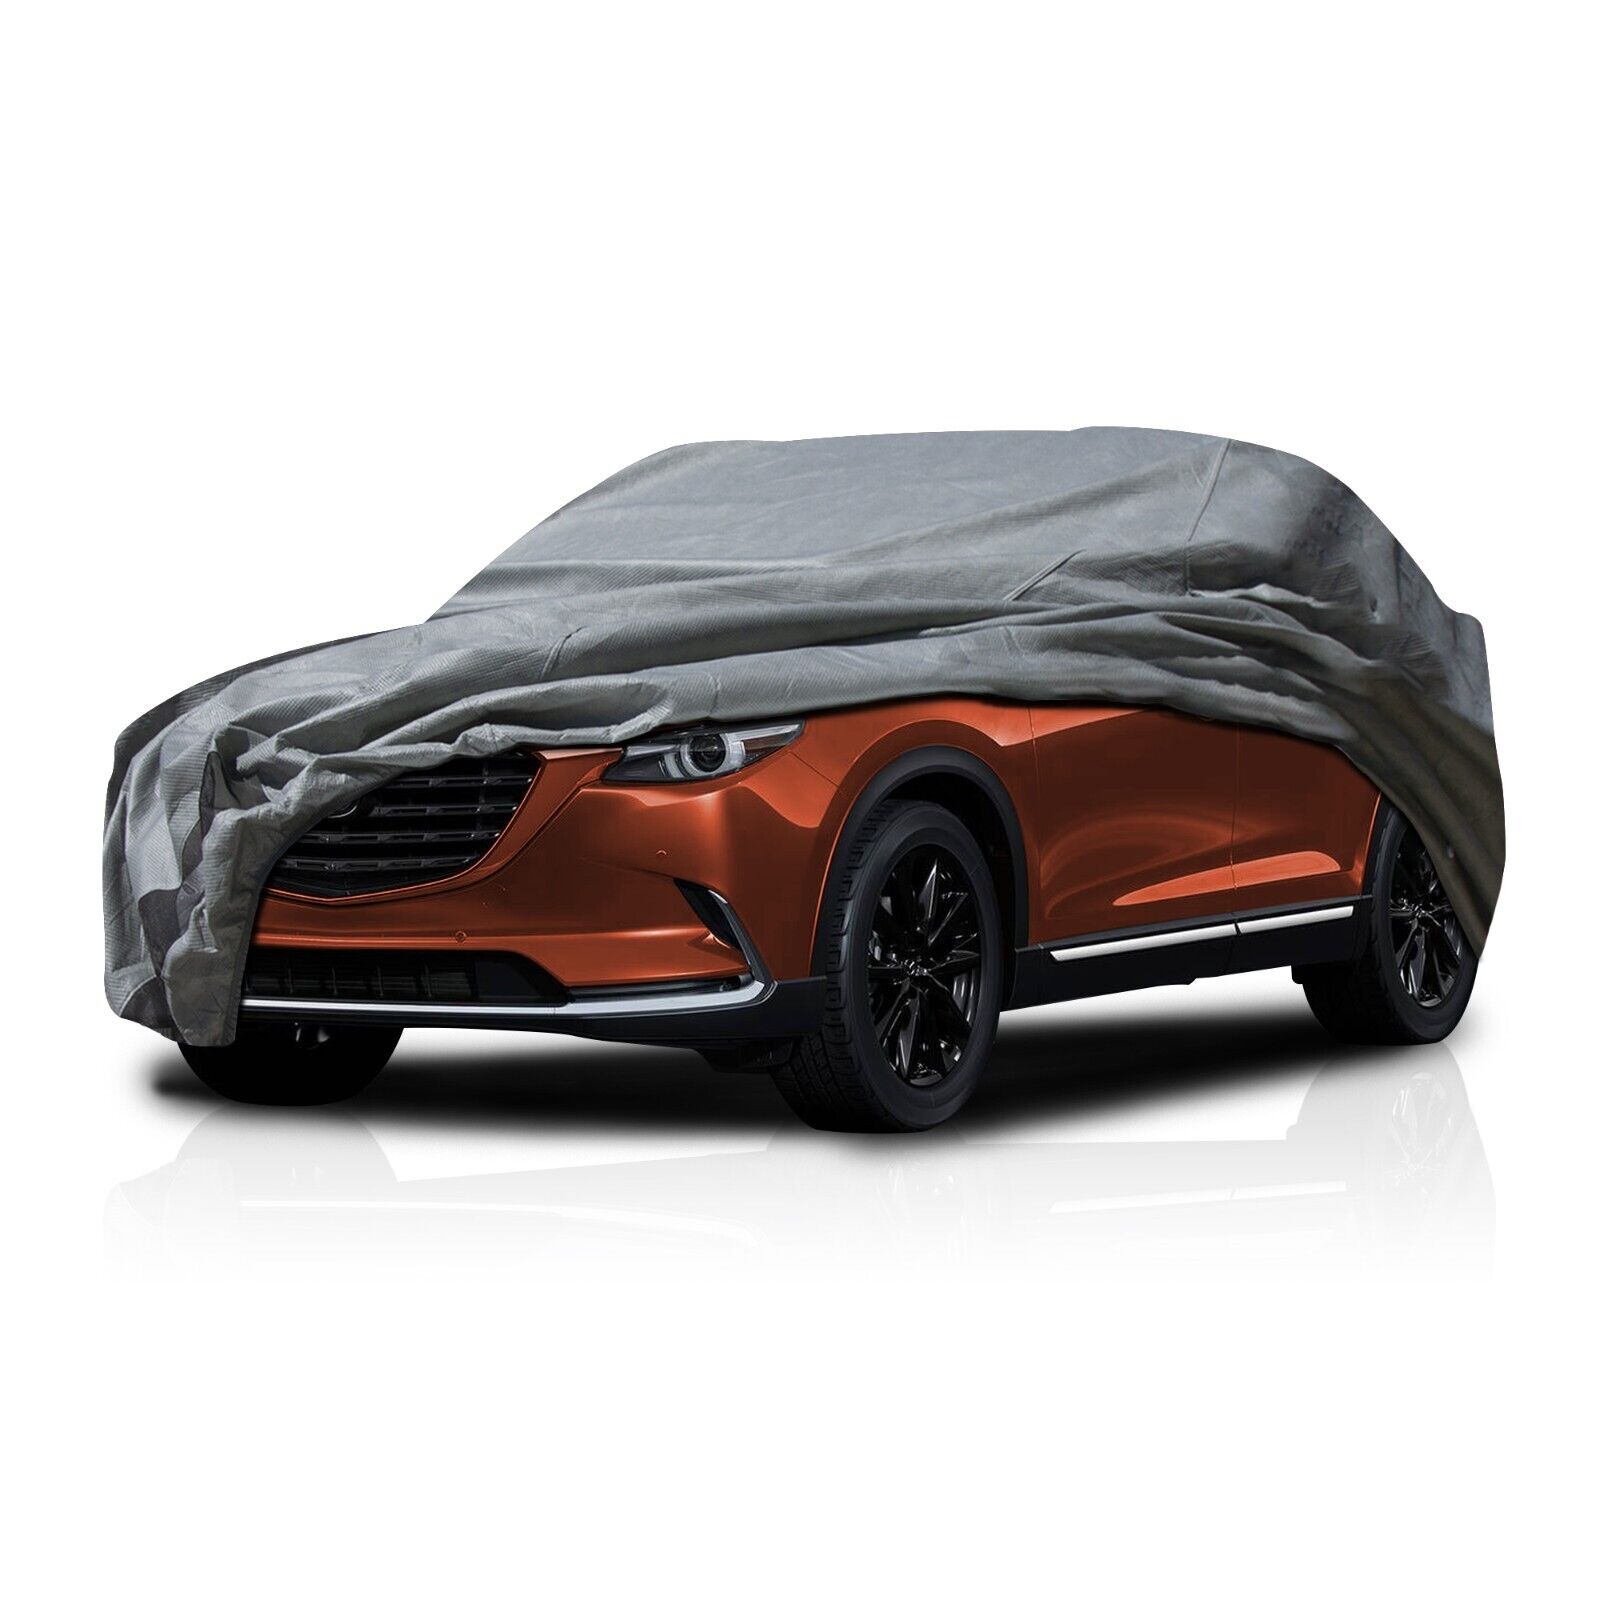 Ultimate HD 5 Layer Water Resistant SUV Car Cover for 2002-2004 Isuzu Axiom